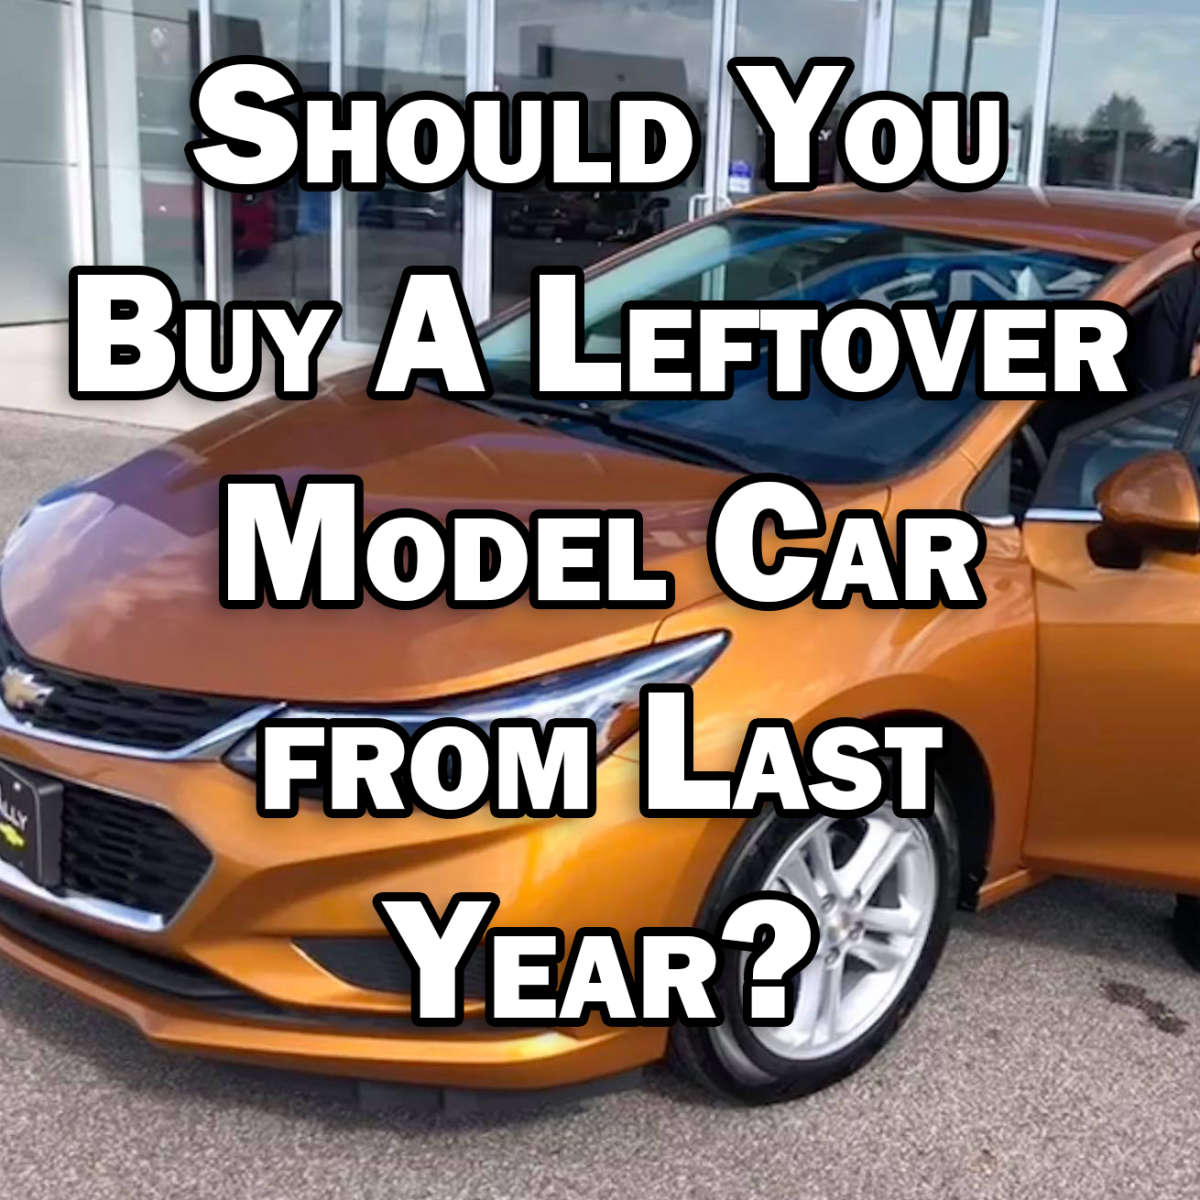 This guide will break down the pros and cons of buying a leftover model car from the previous year.